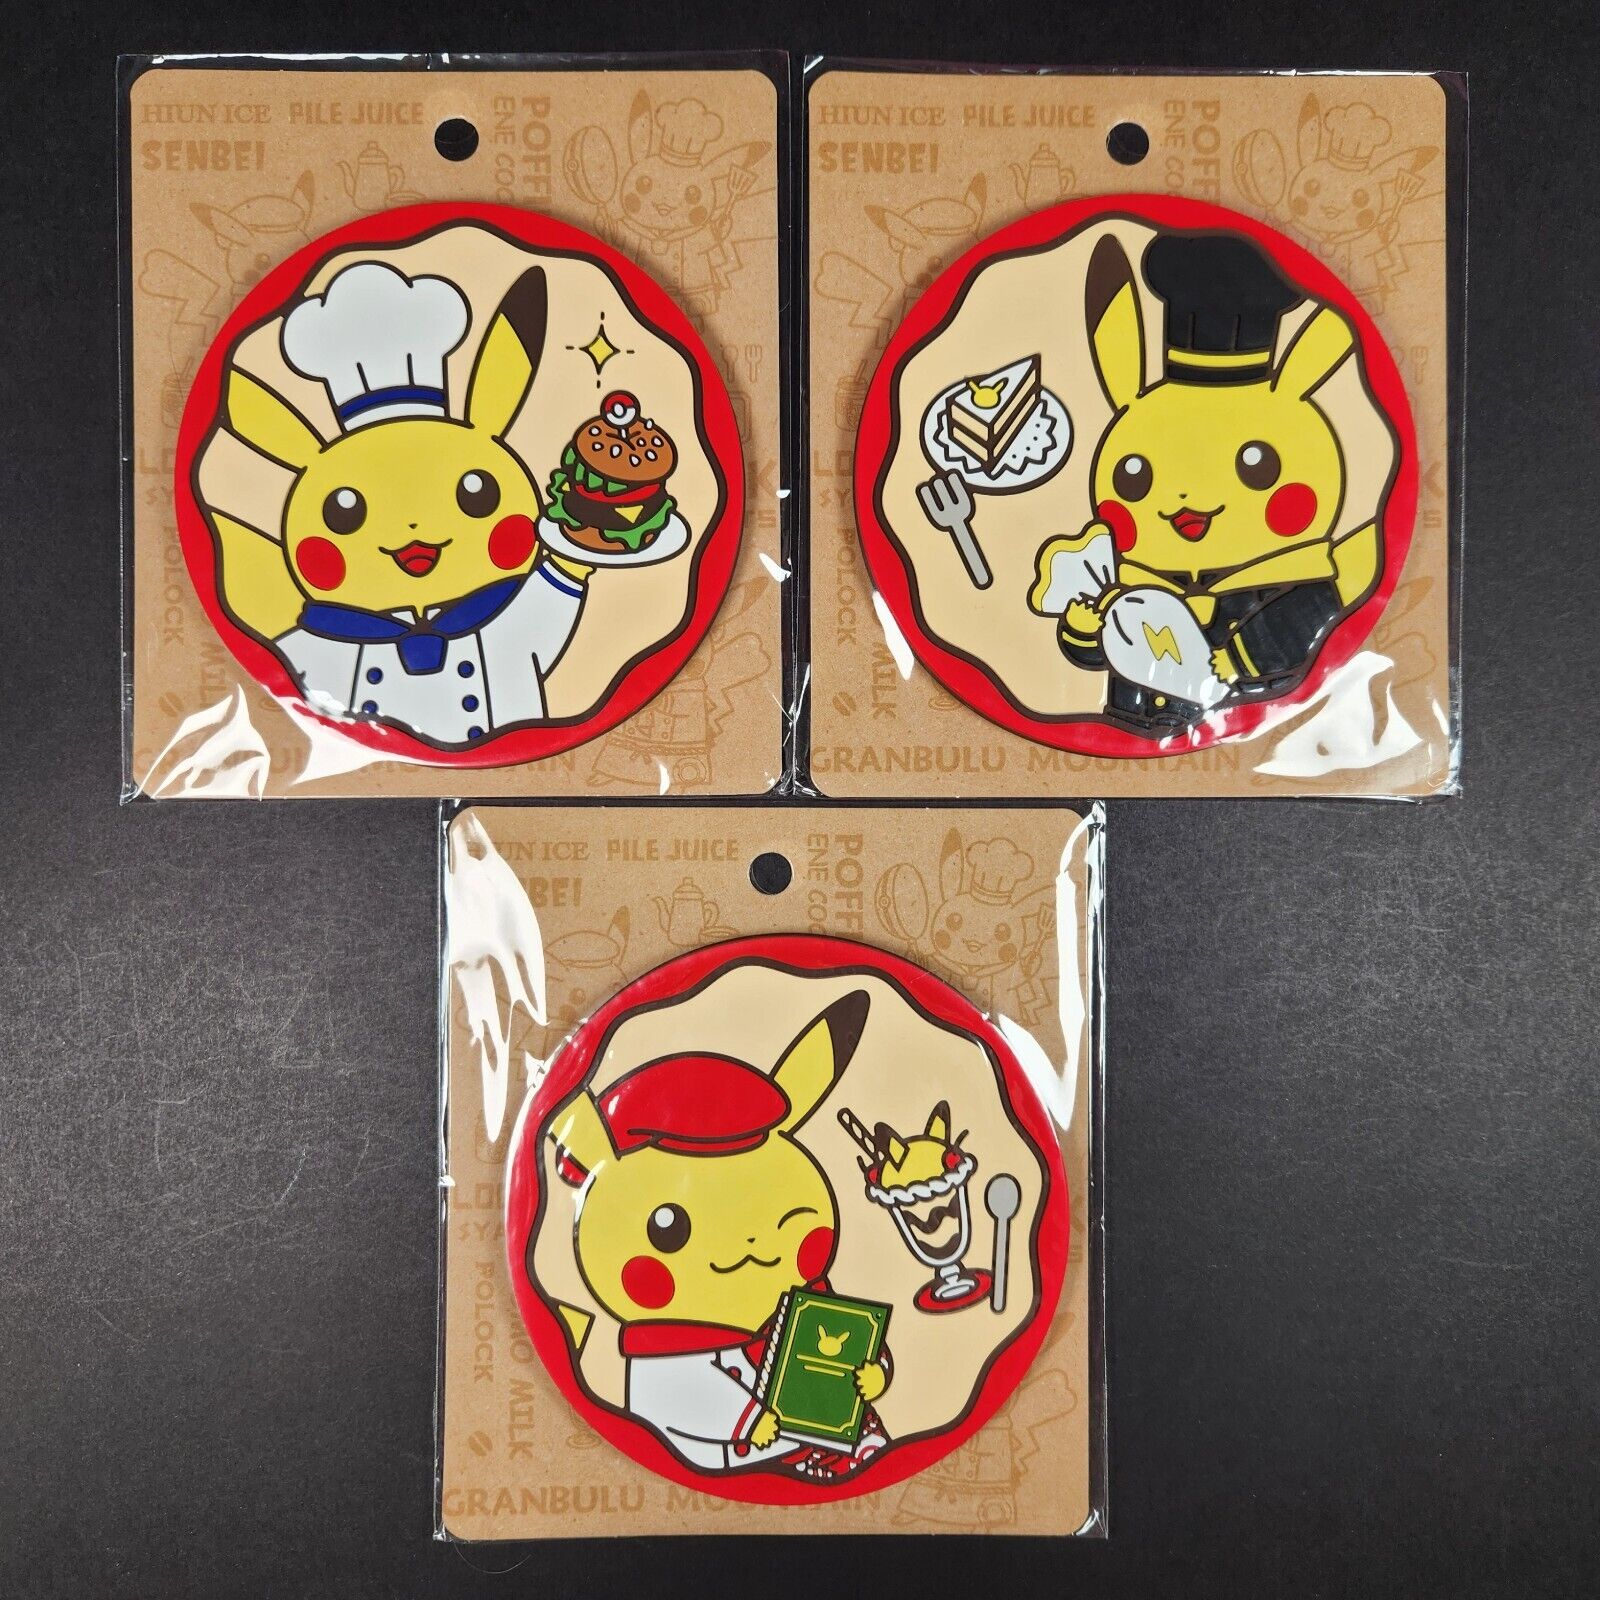 NEW Pokemon Cafe Exclusive Chef Pikachu Rubber Coasters (Set of 3) from Japan